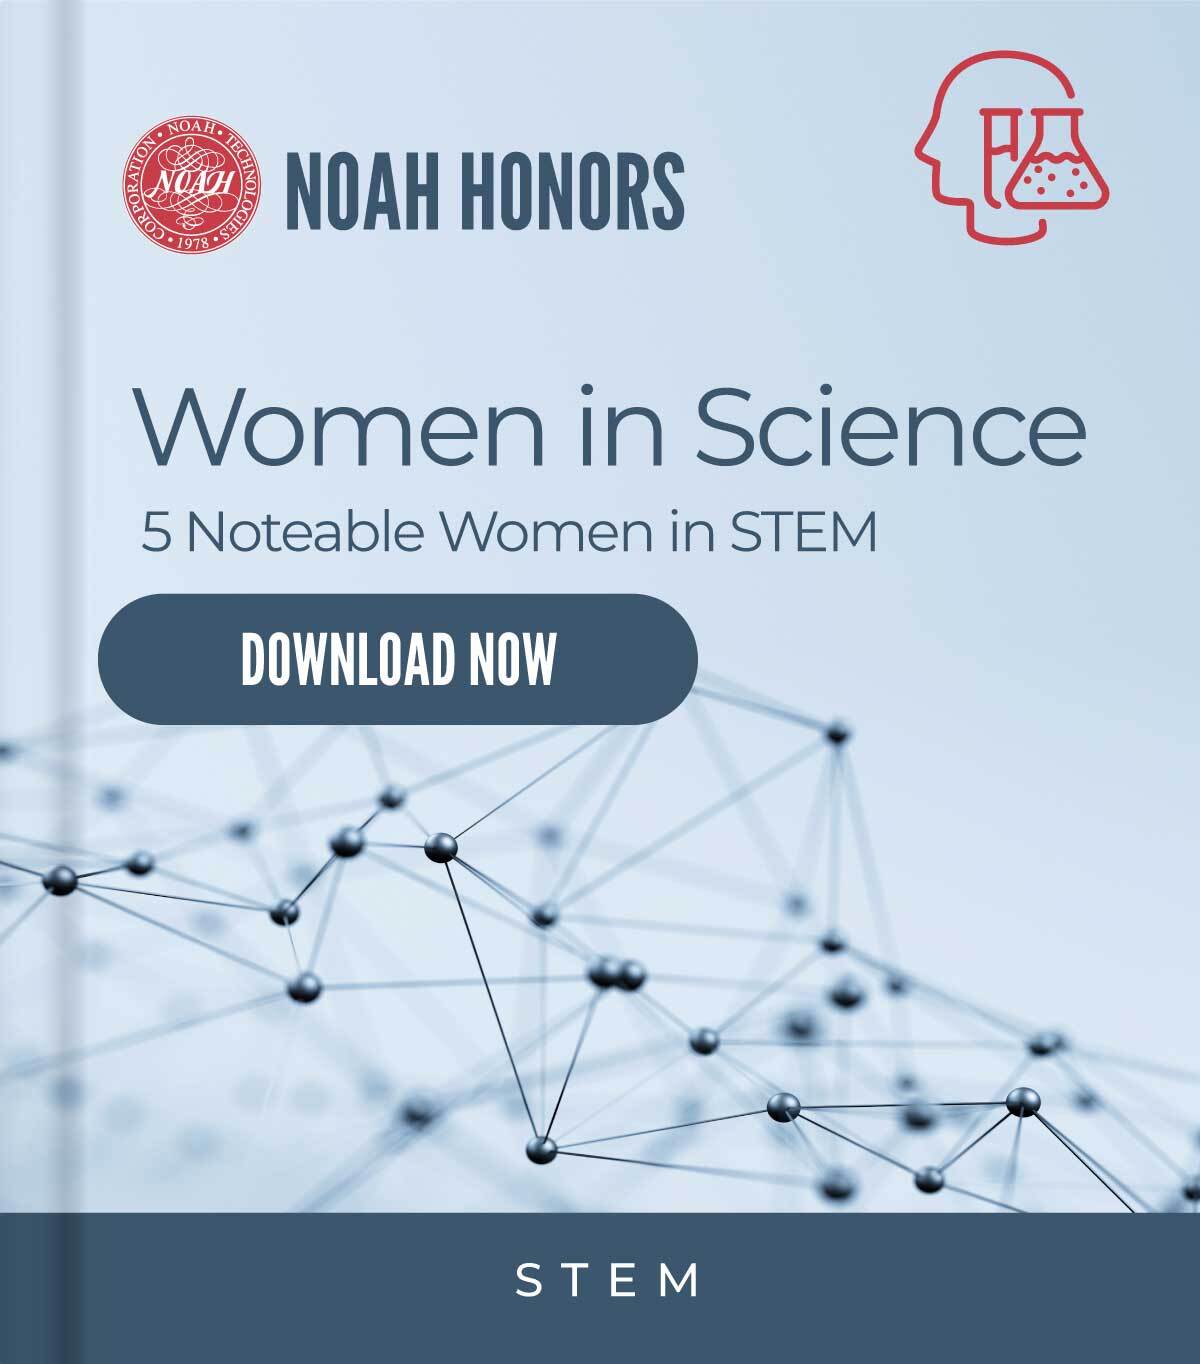 Noah honors women in science cover graphic to download white paper now